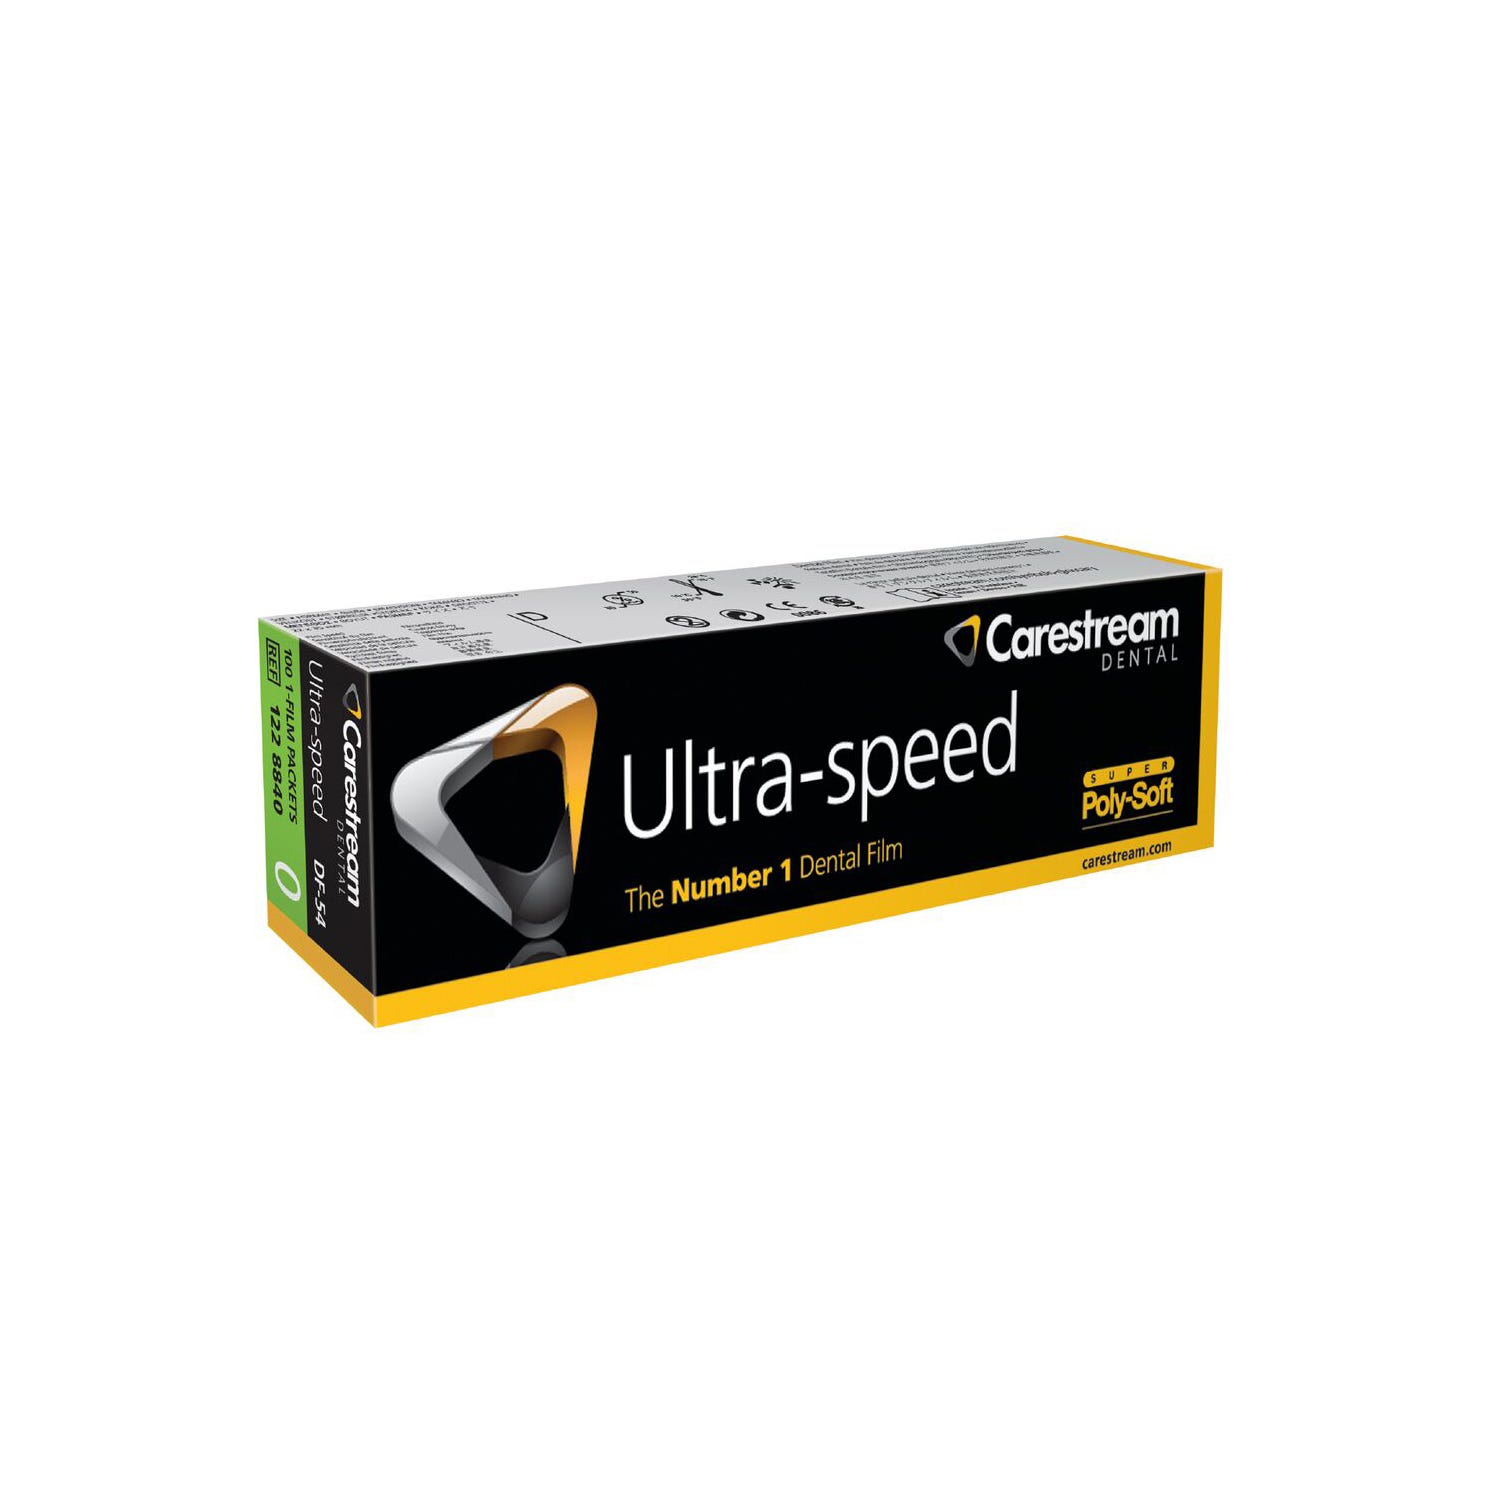 Ultra-speed™ Intraoral Dental Film, Size 0, DF-54, Super Poly-Soft™ Packets - 100/Box